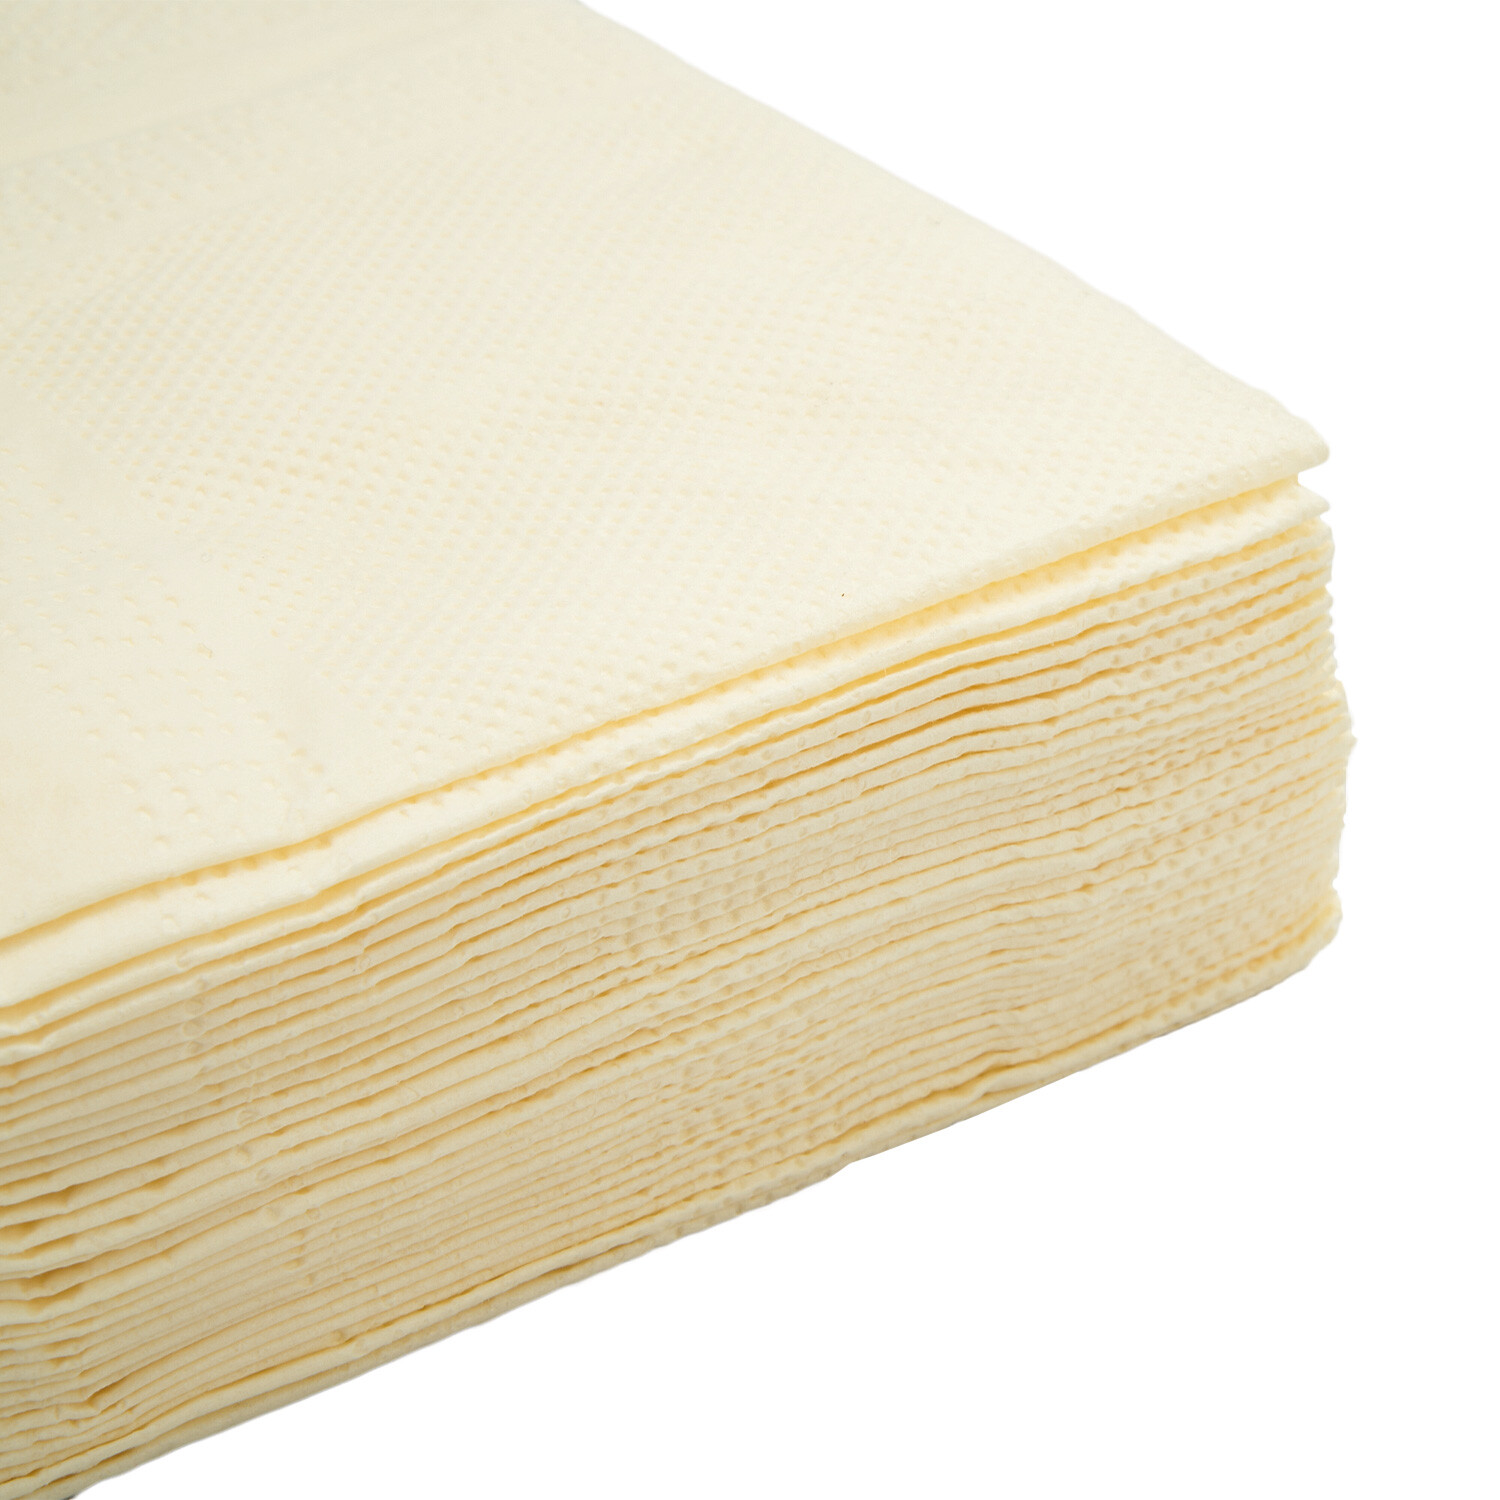 Pack of My Home Napkins - Cream Image 3